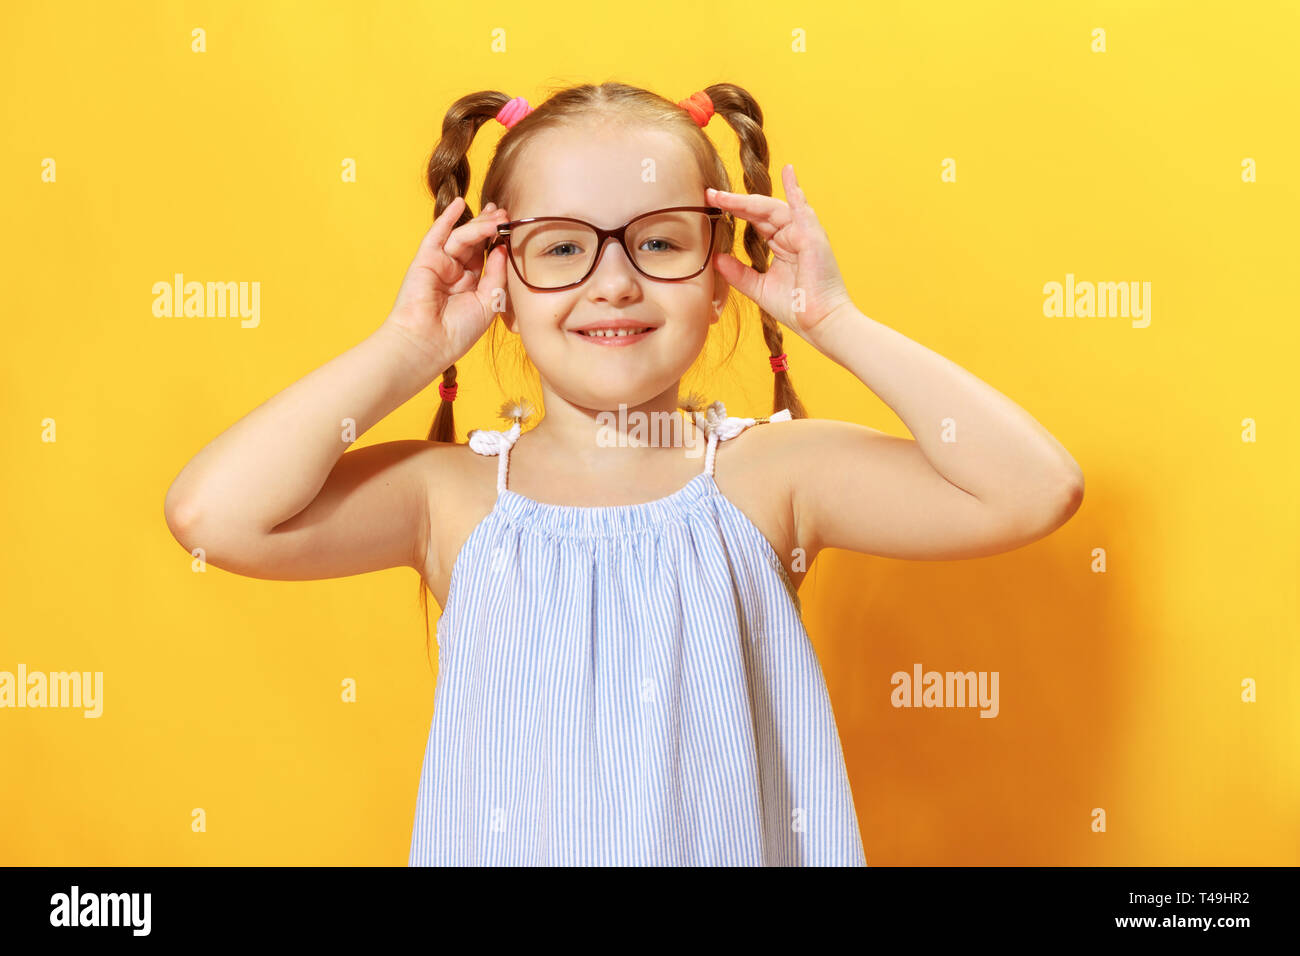 Portrait of a funny little girl on a yellow background. Preschool child straightens glasses. Stock Photo